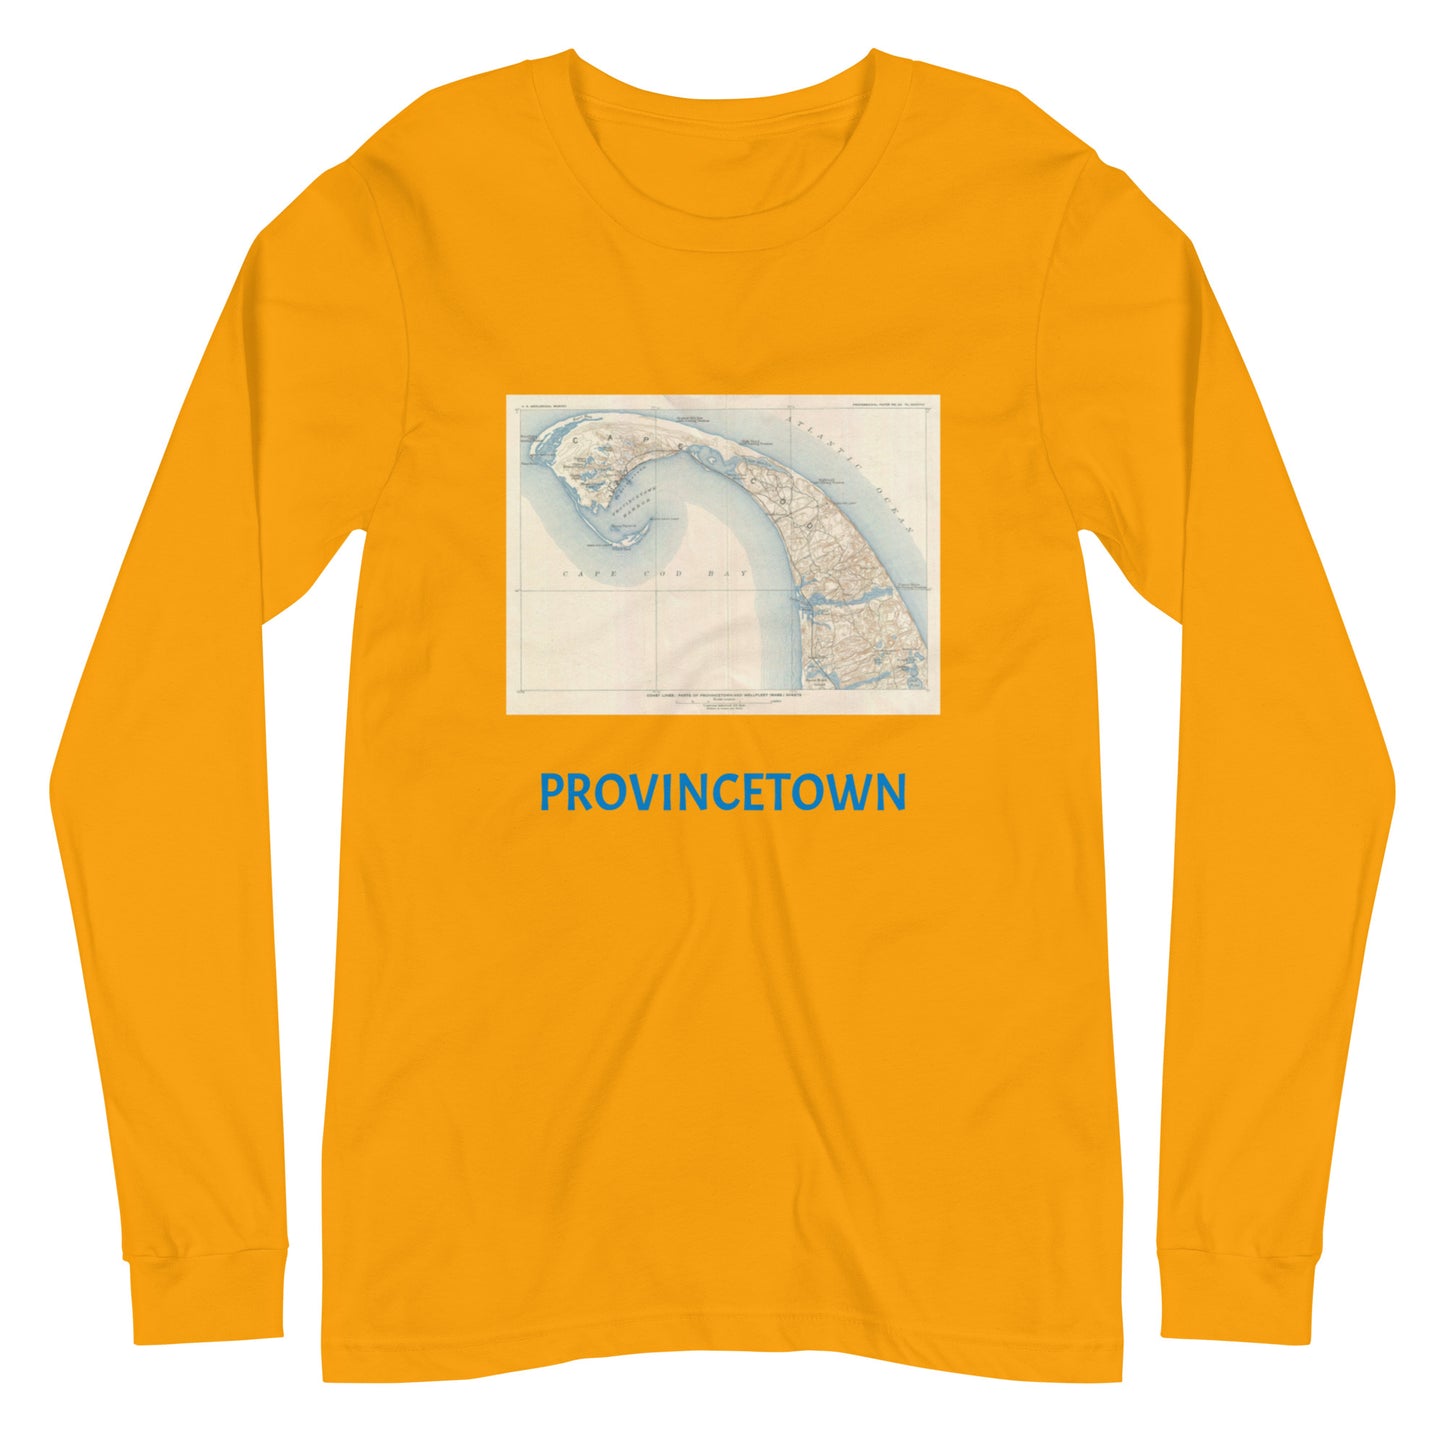 Provincetown Image is from a 1908 U.S. Geological Survey's map of Cape Cod, Massachusetts.Unisex Long Sleeve Tee